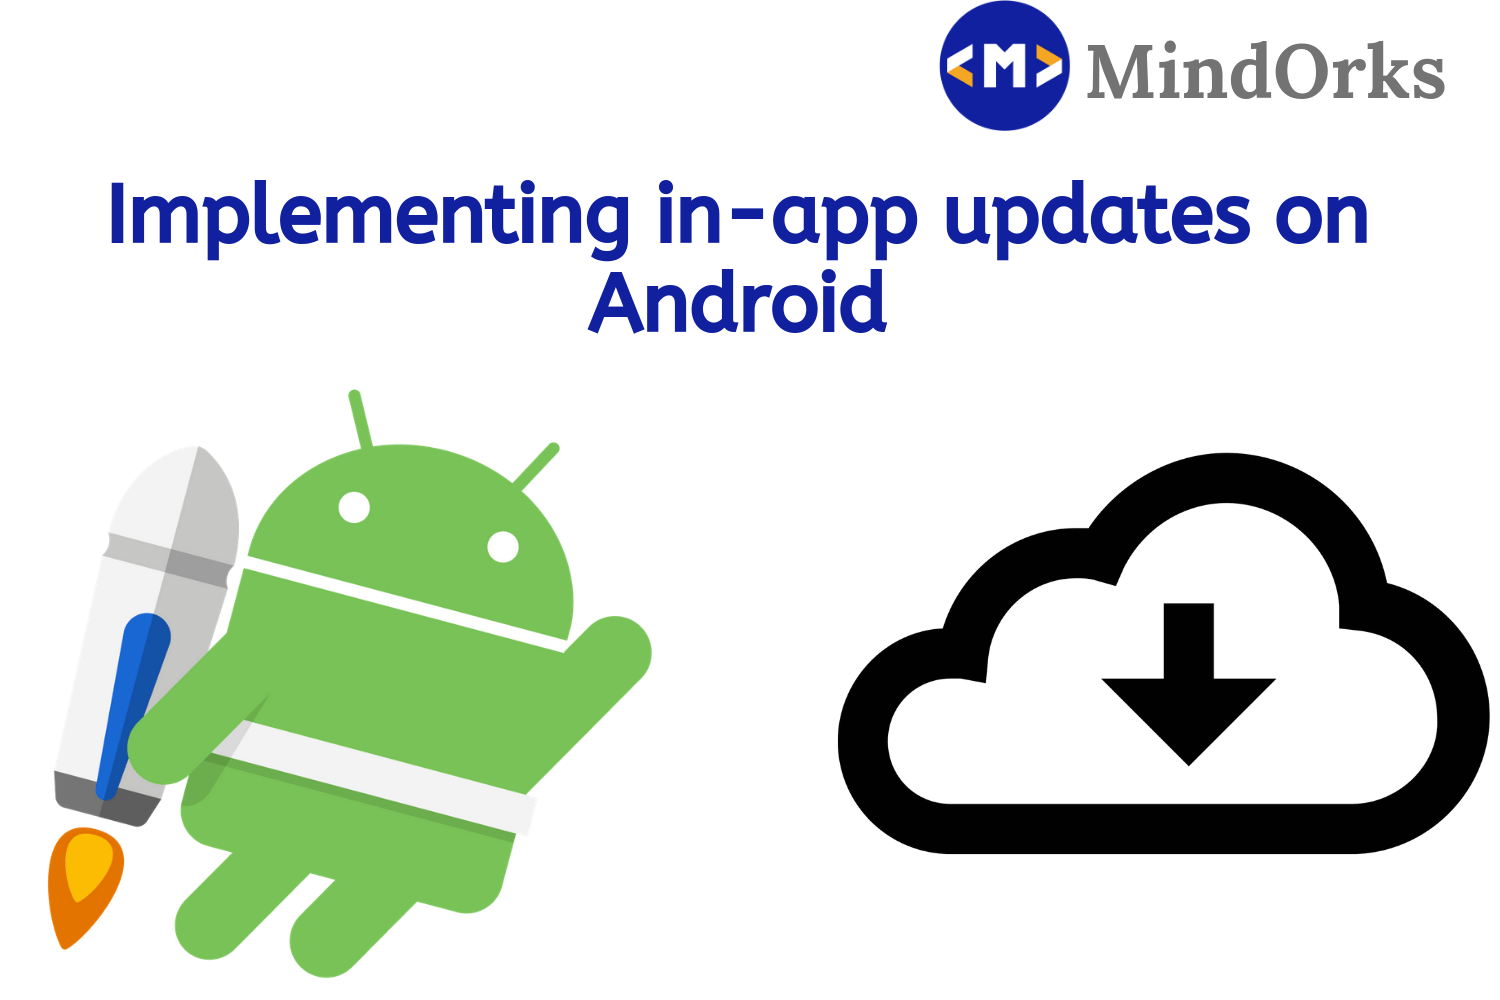 Implementing in-app updates on Android